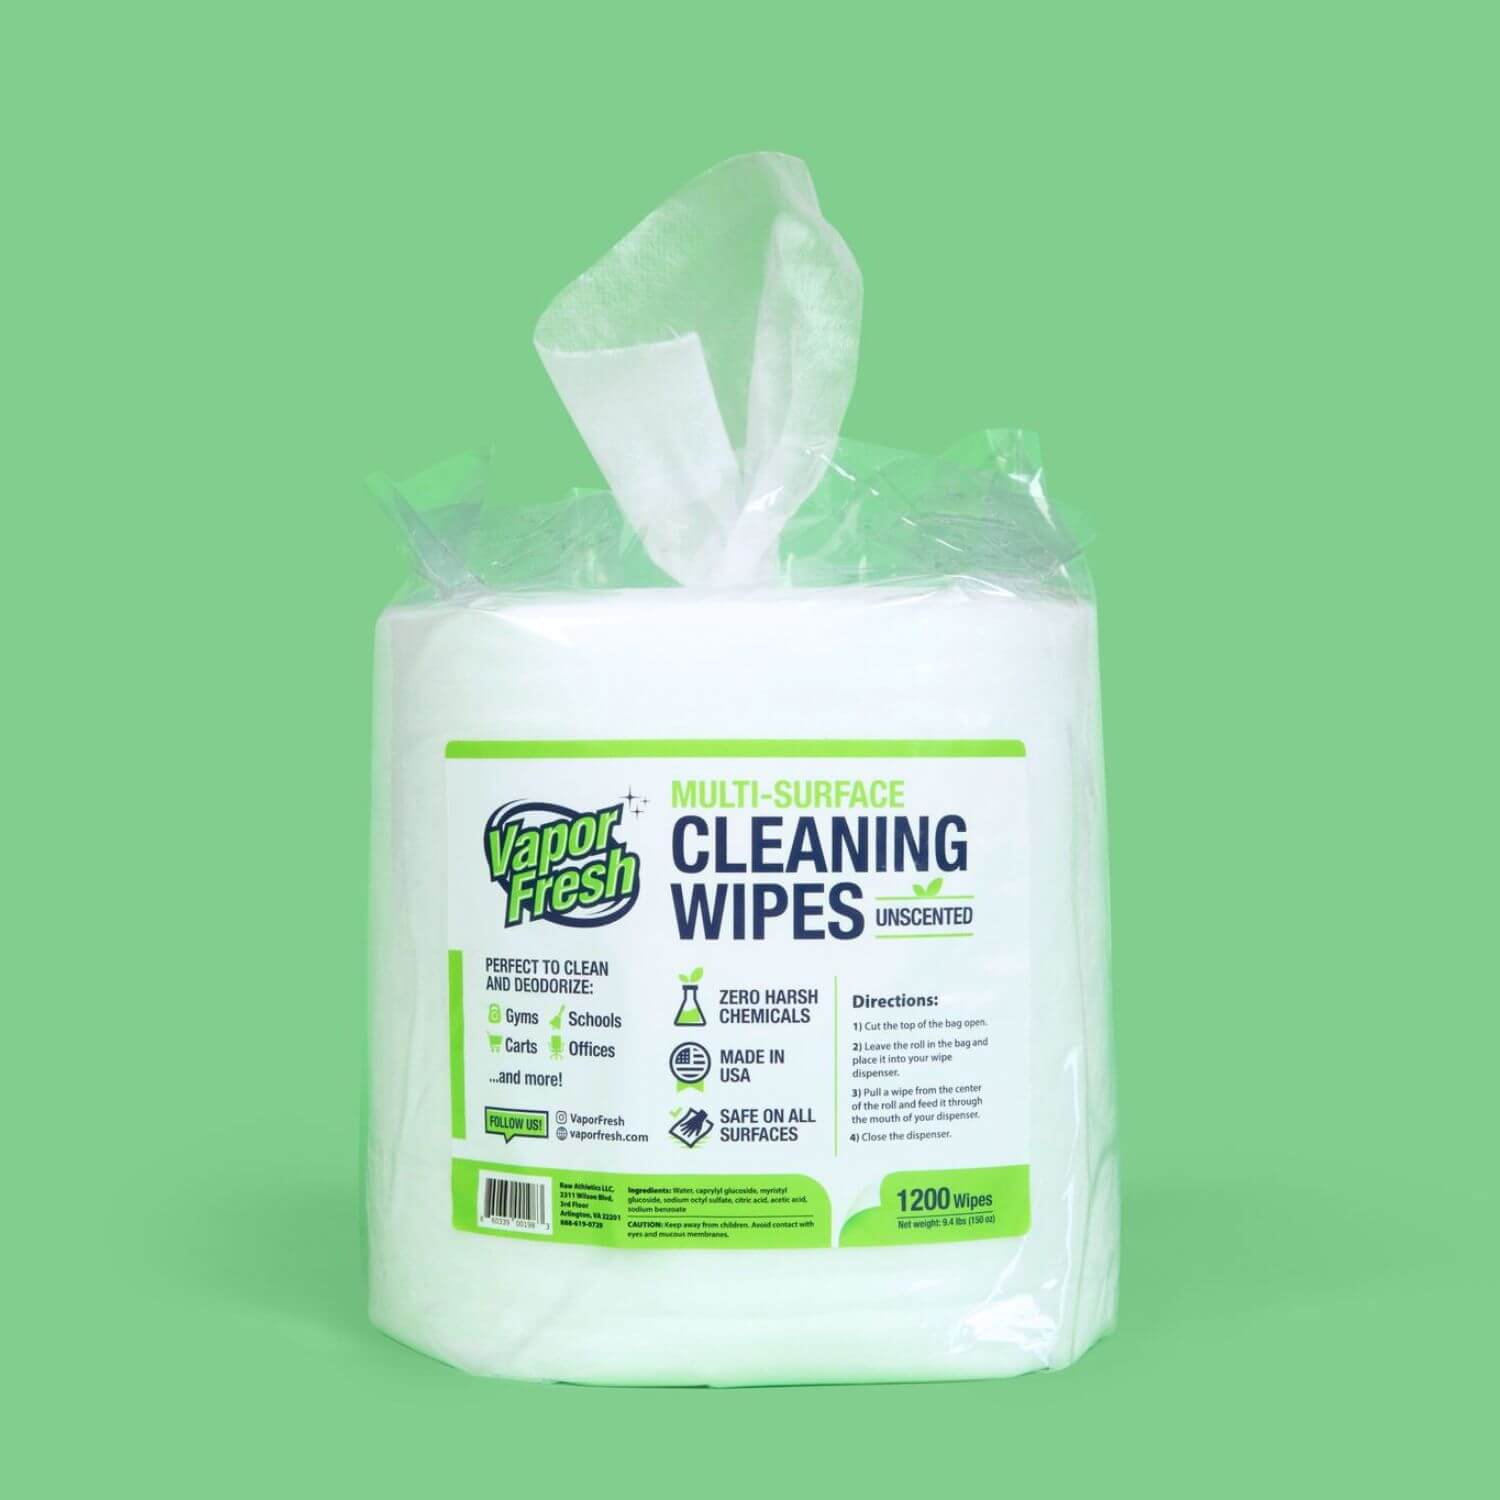 Kitchen Wipes Heavy Duty Cleaning Wipes for House, Bathroom, Hand,  Microwave, Pet, Travel, Car, Wall, Floor, Glass, Bathtub, Gym, Degreasing,  Dusting Cleaning Supplies, (35Wipes, Pack of 3, Total 105) 